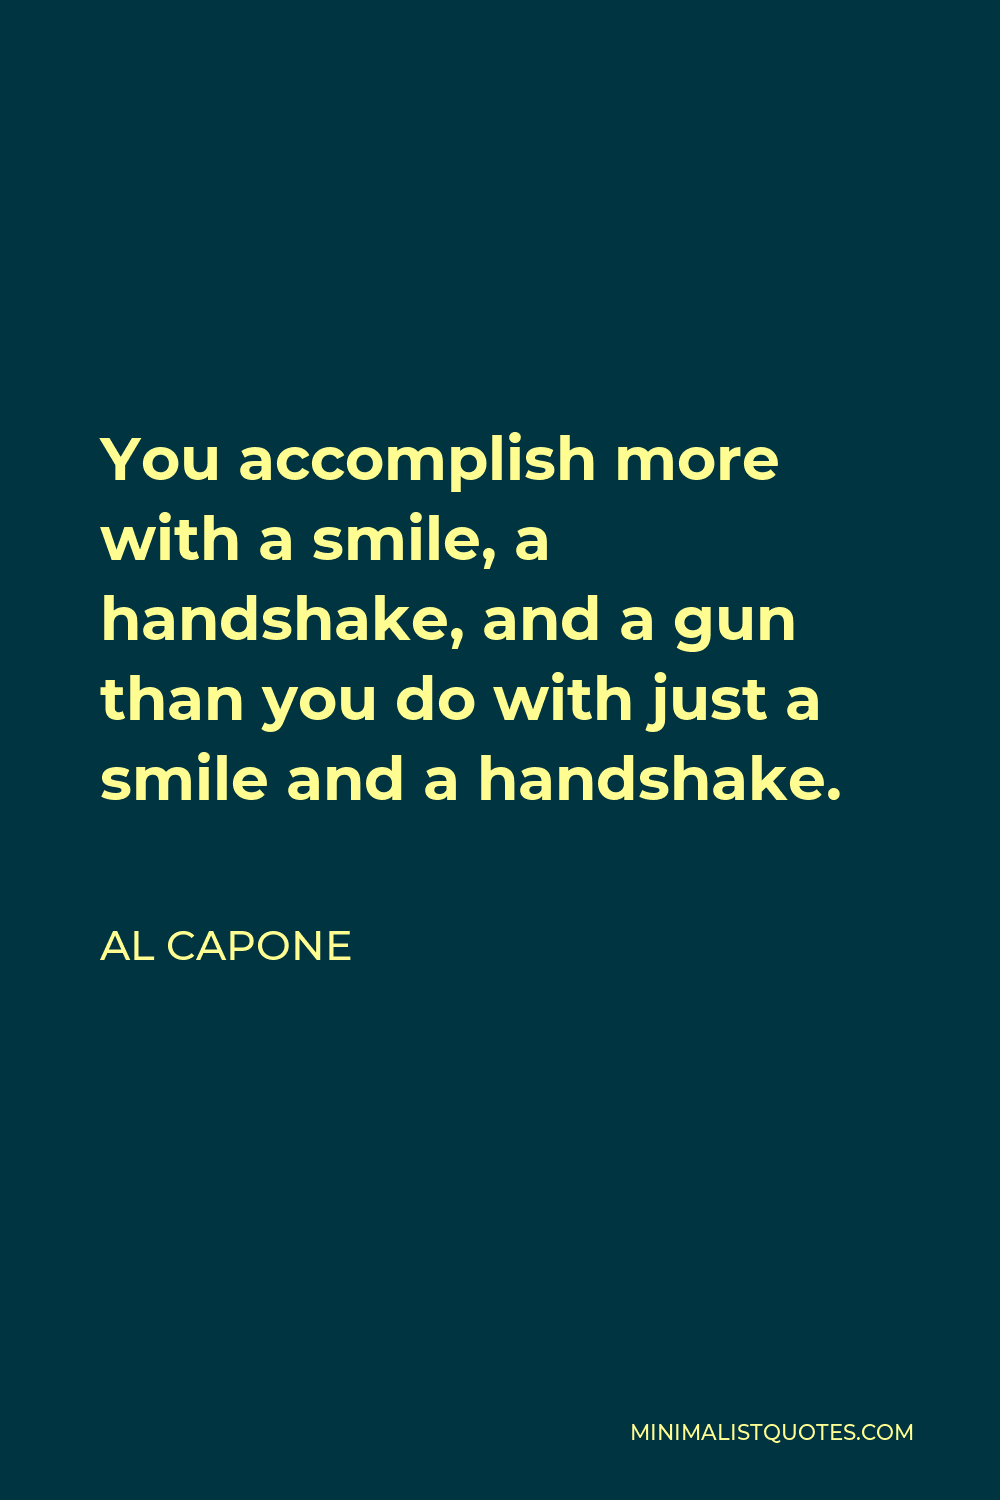 Al Capone Quote - You accomplish more with a smile, a handshake, and a gun than you do with just a smile and a handshake.